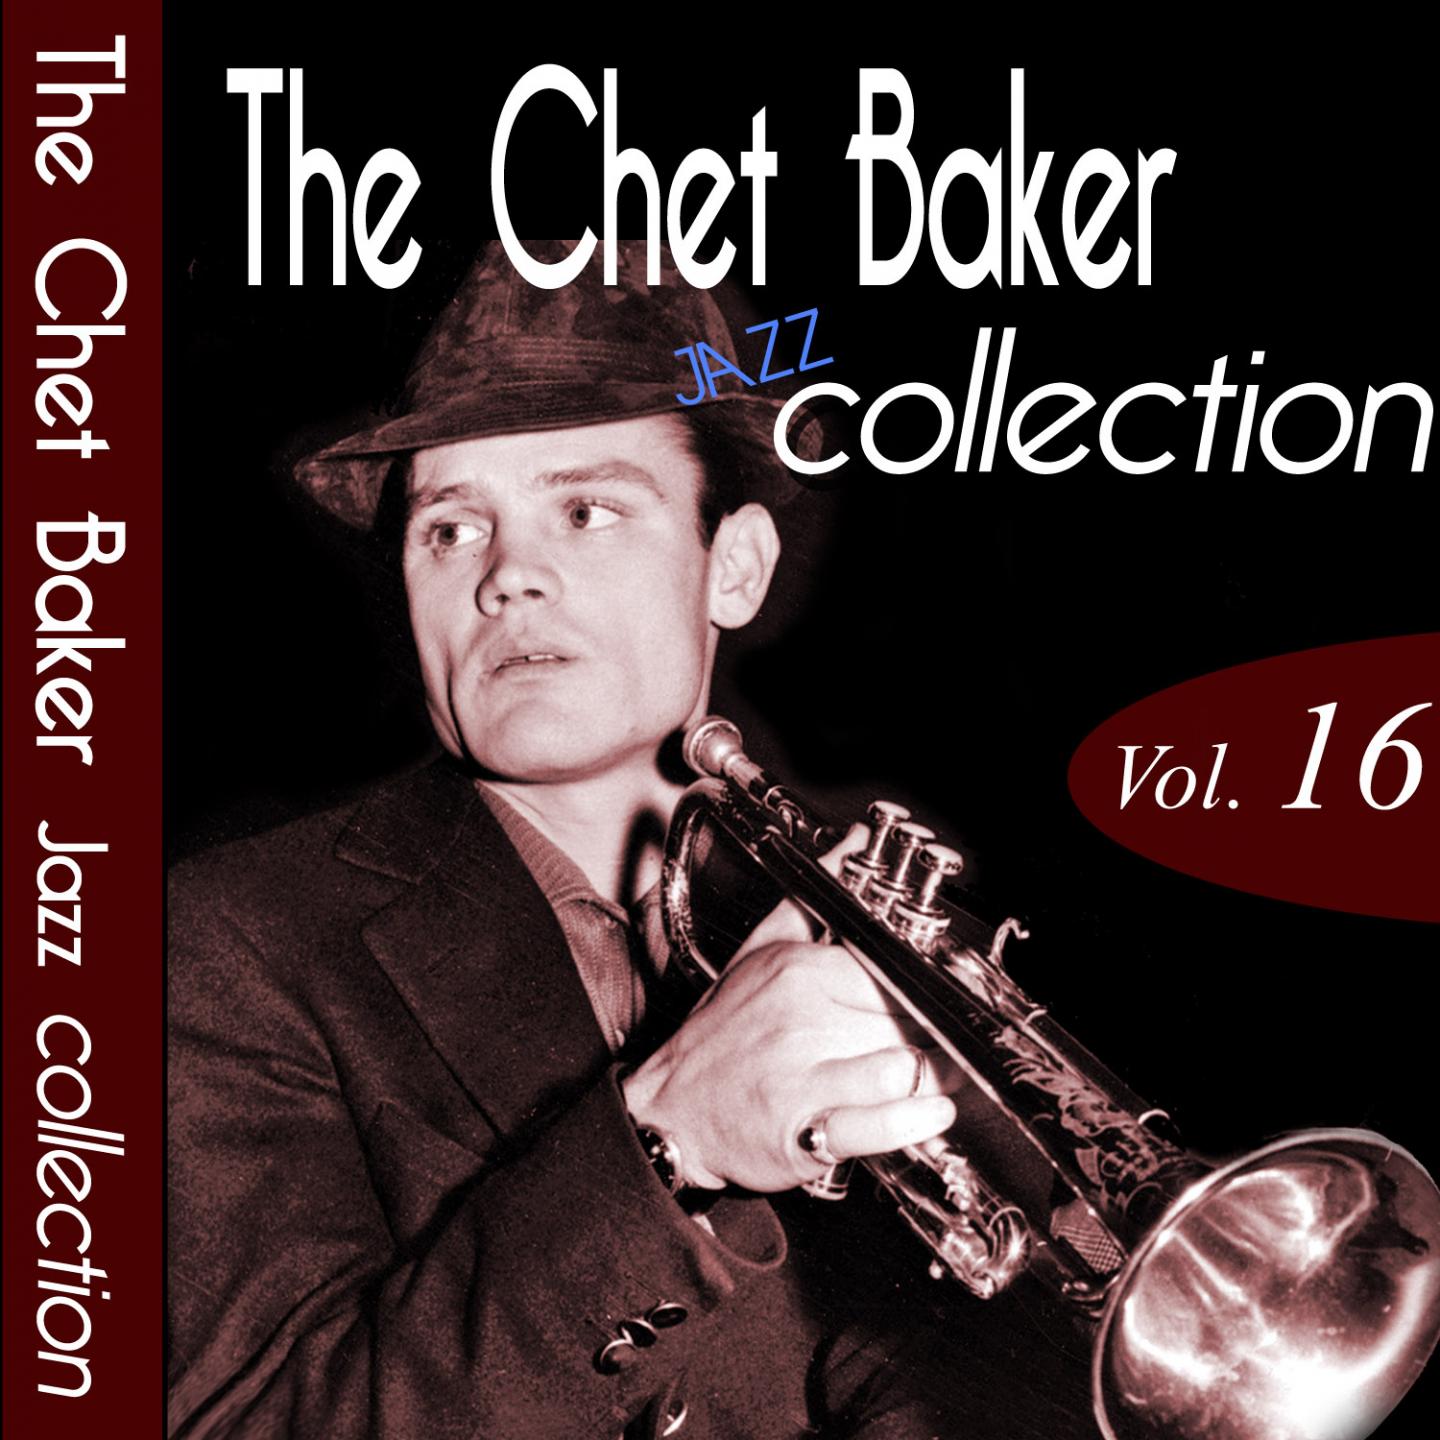 The Chet Baker Jazz Collection, Vol. 16 (Remastered)